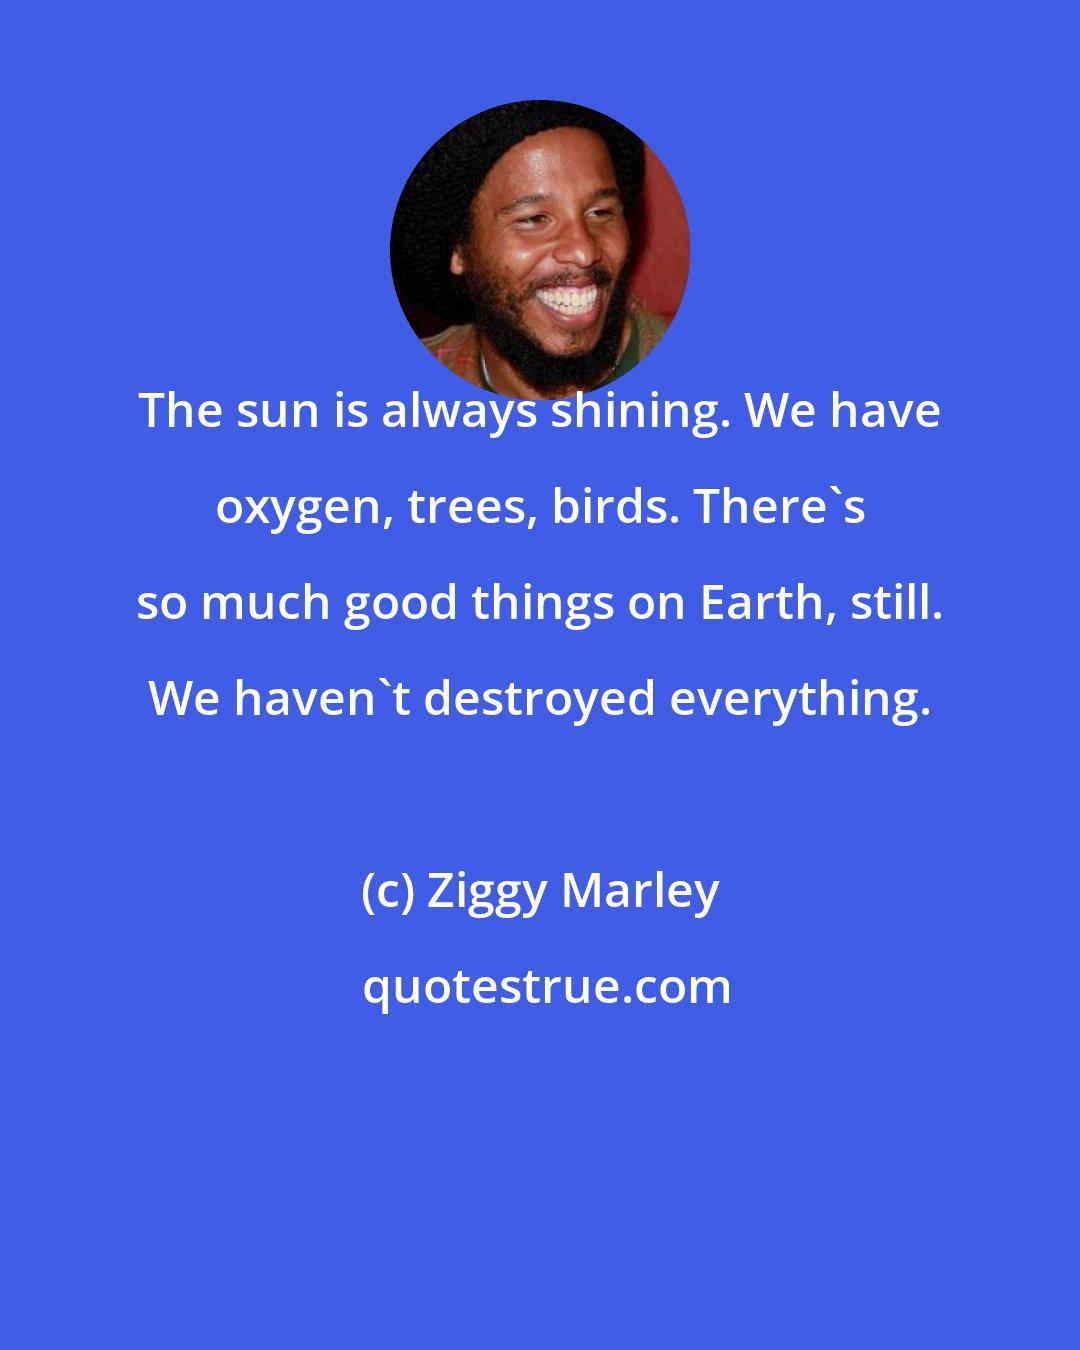 Ziggy Marley: The sun is always shining. We have oxygen, trees, birds. There's so much good things on Earth, still. We haven't destroyed everything.